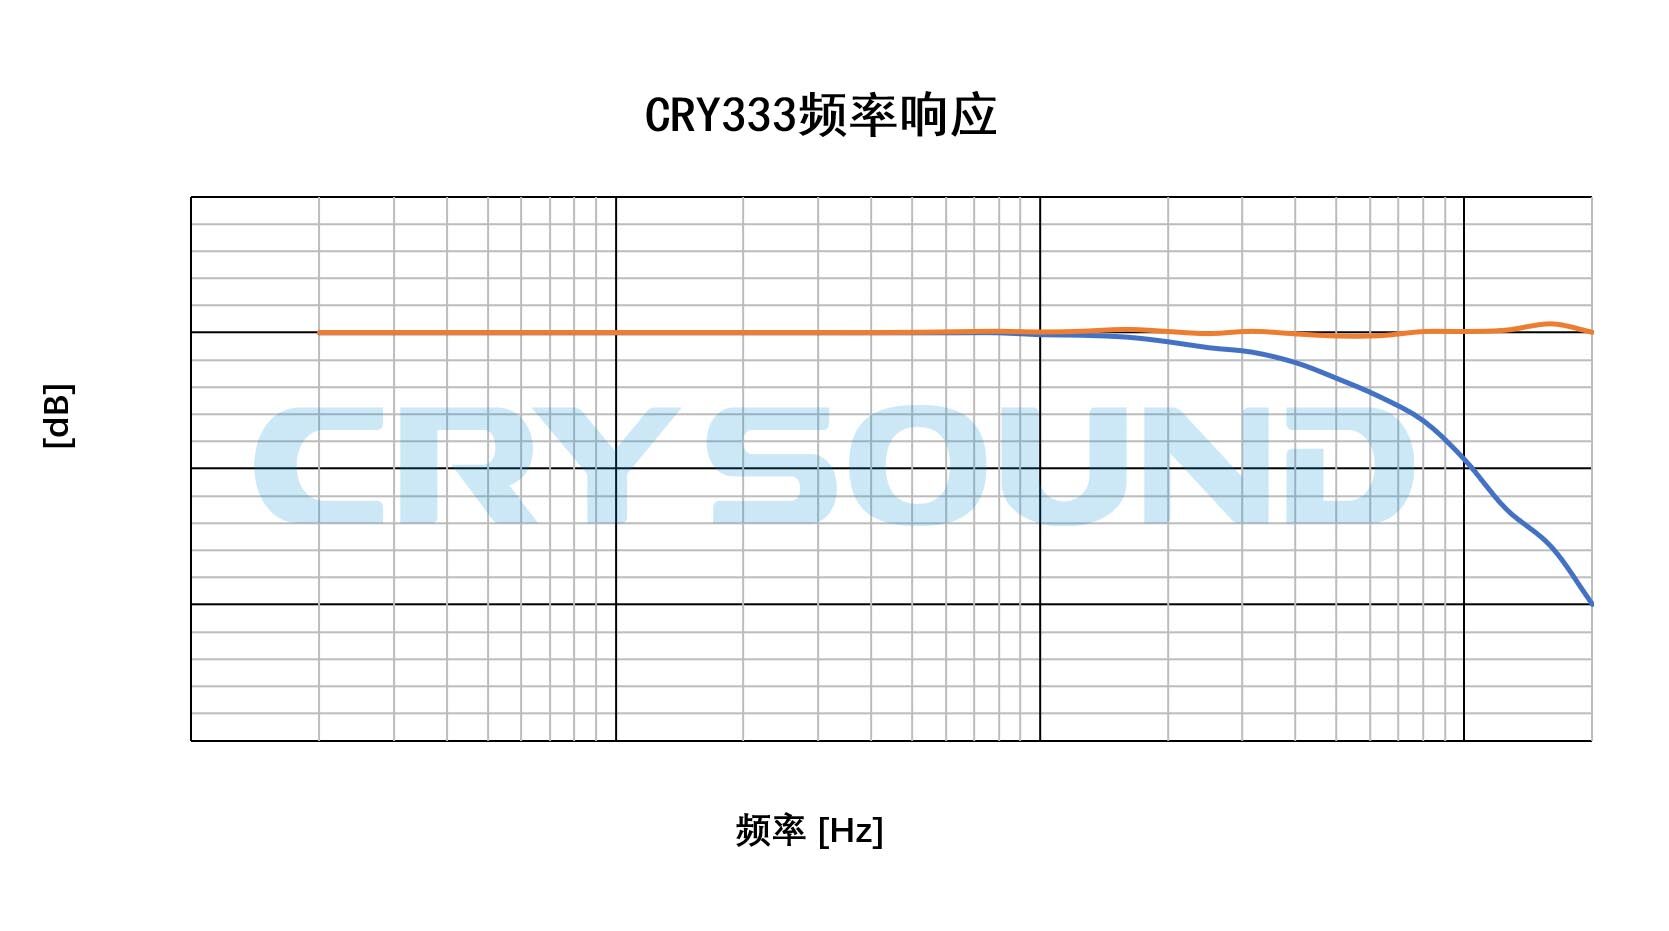 Typical frequency response curve of CRY333